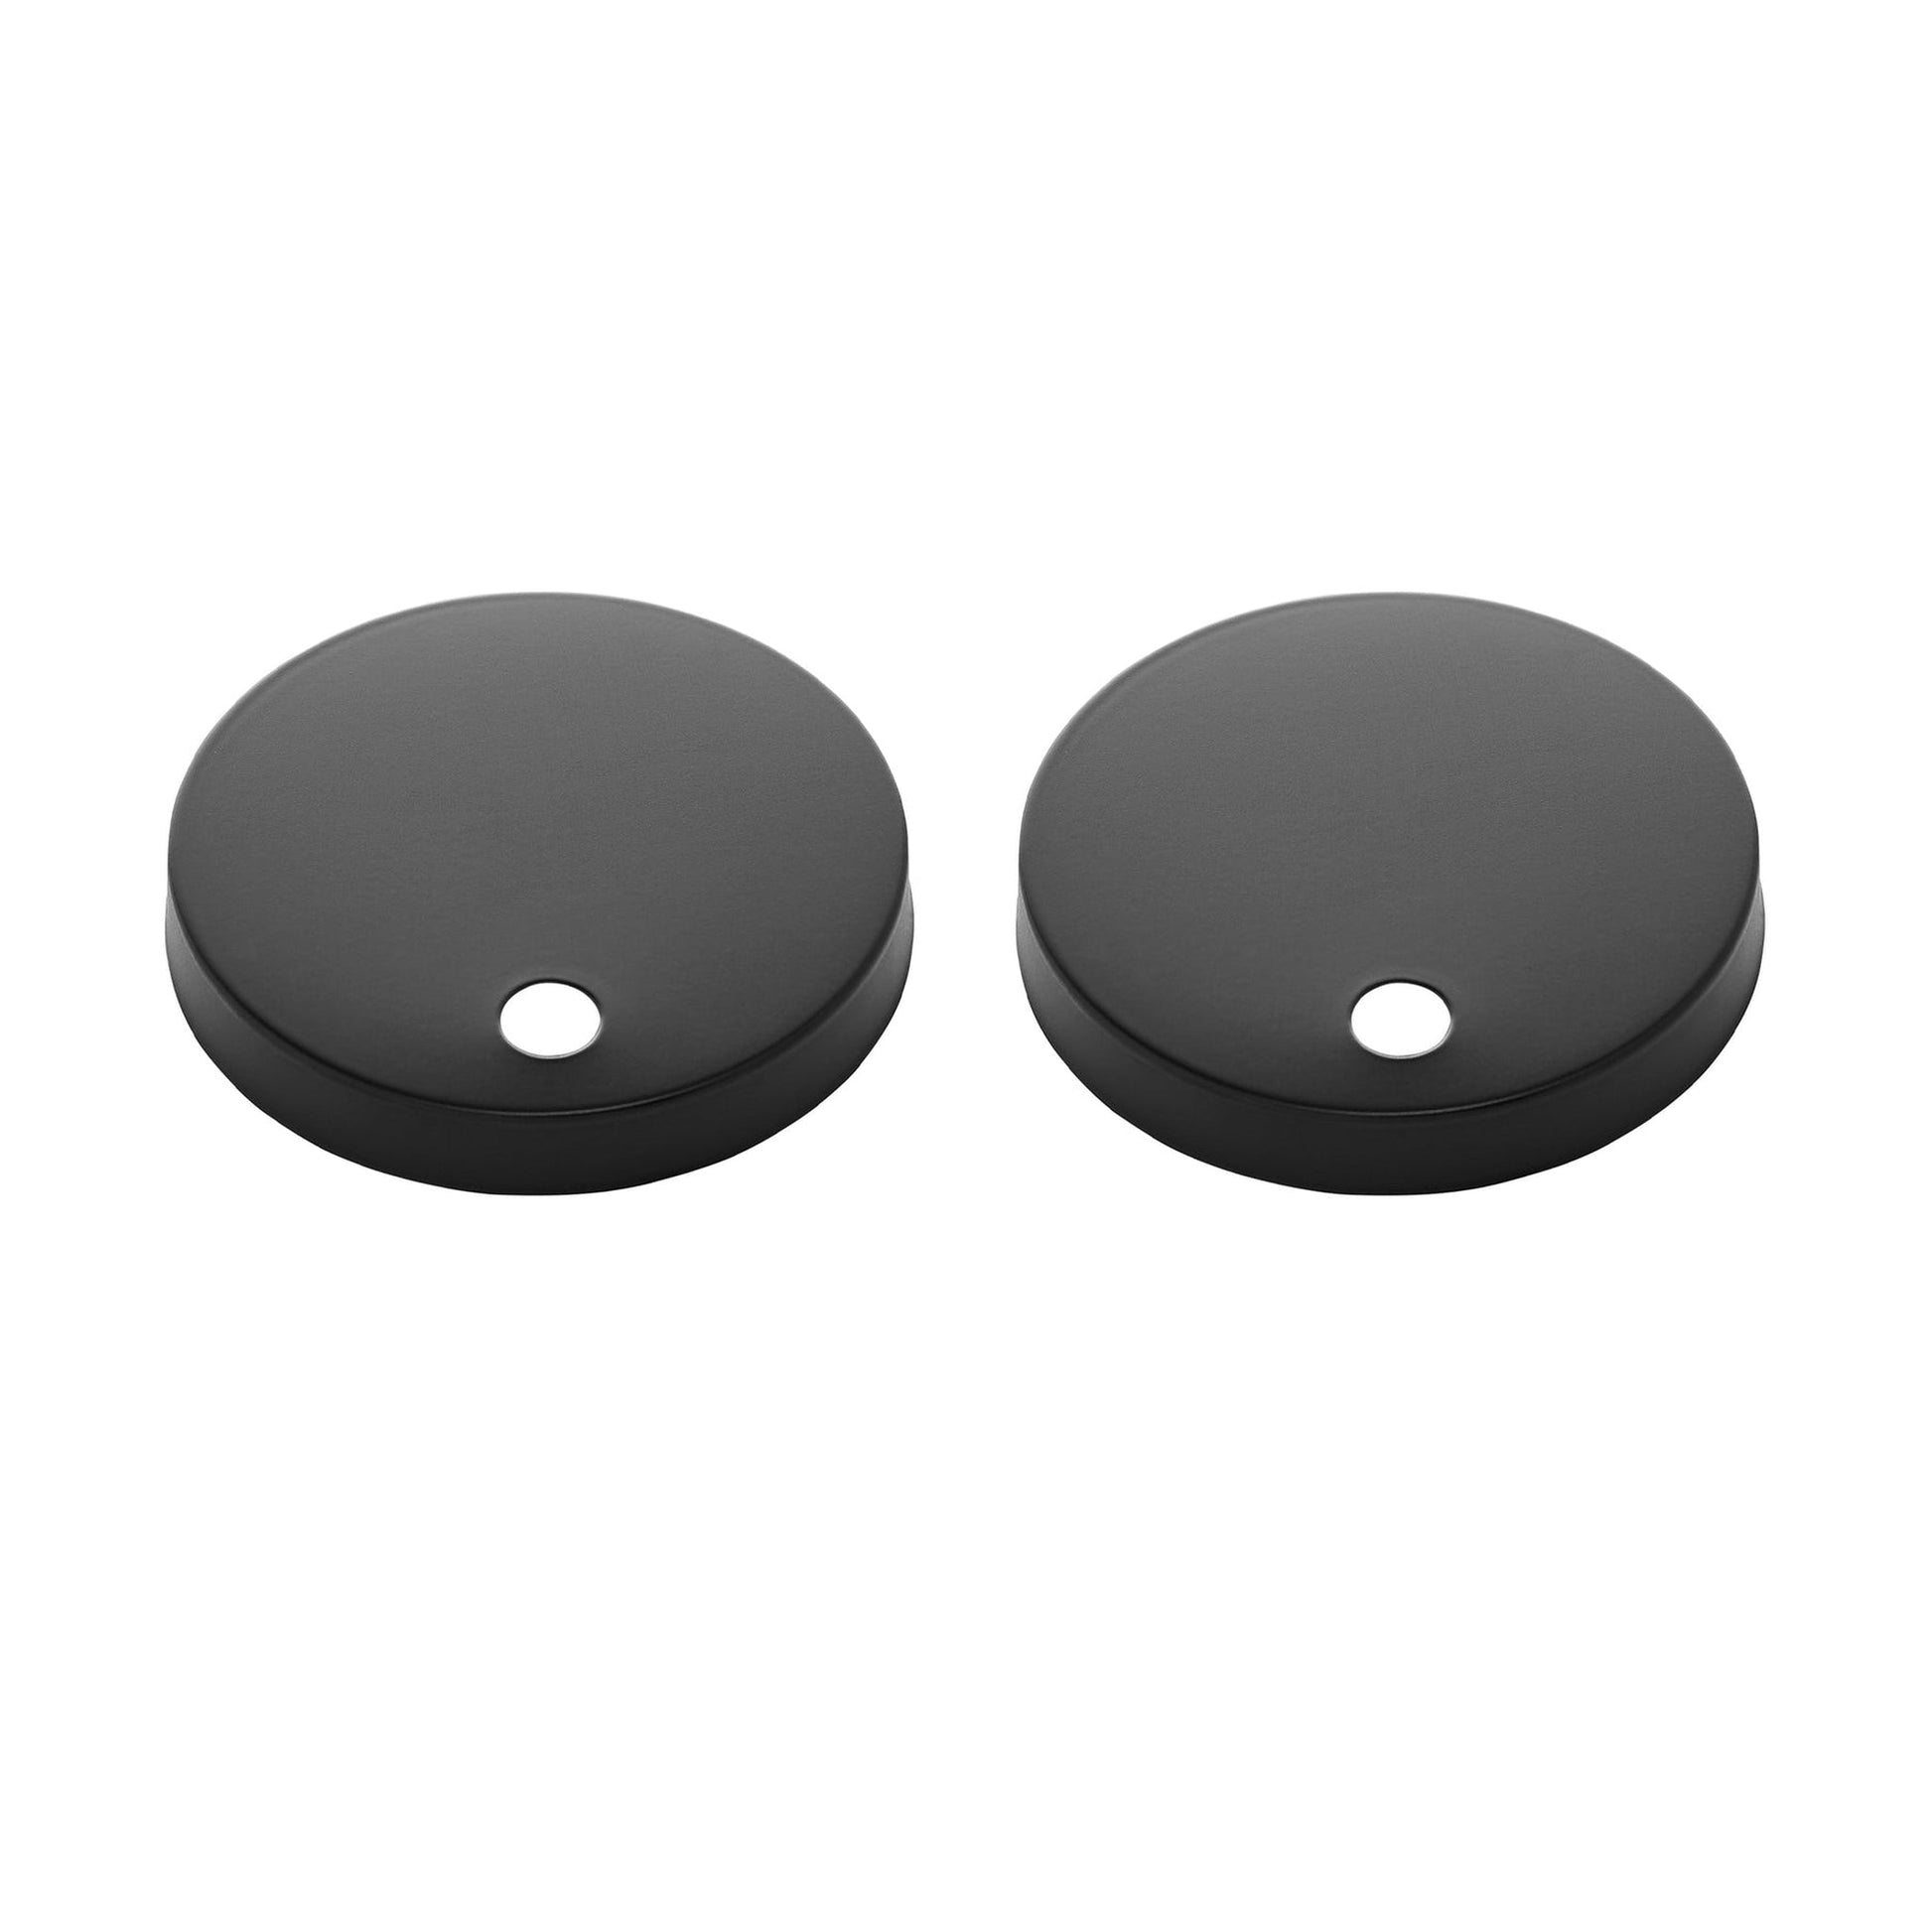 Swiss Madison Oval Black Toilet Push Buttons With QQ Feet For SM-1T254